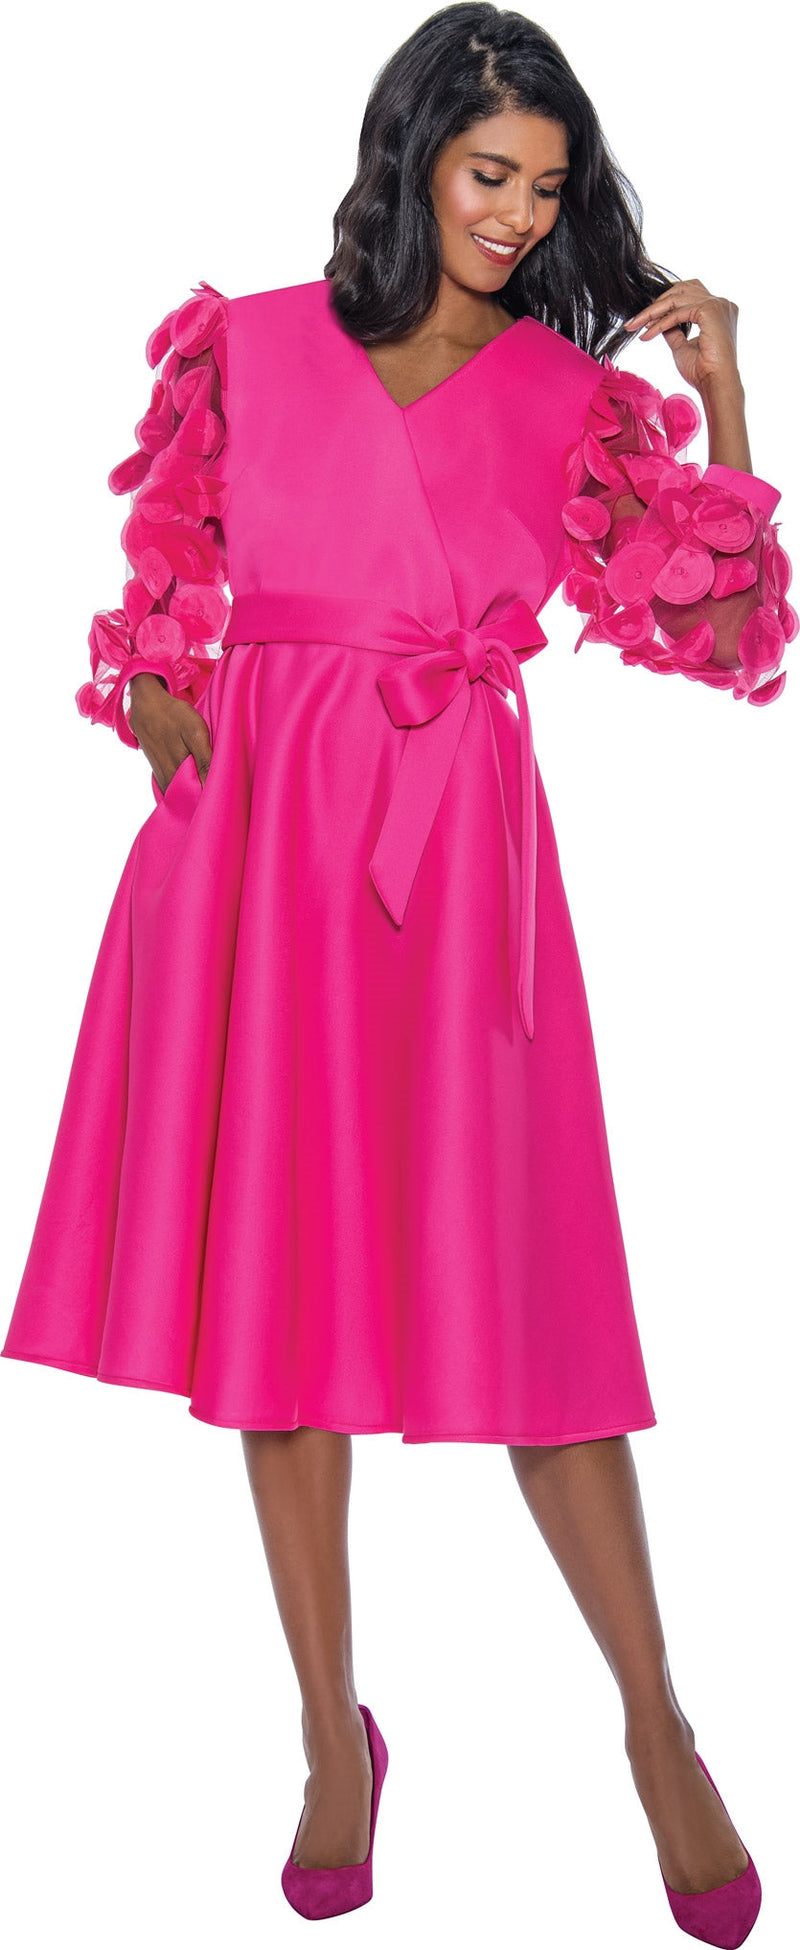 Church Dress By Nubiano 921-Hot Pink - Church Suits For Less